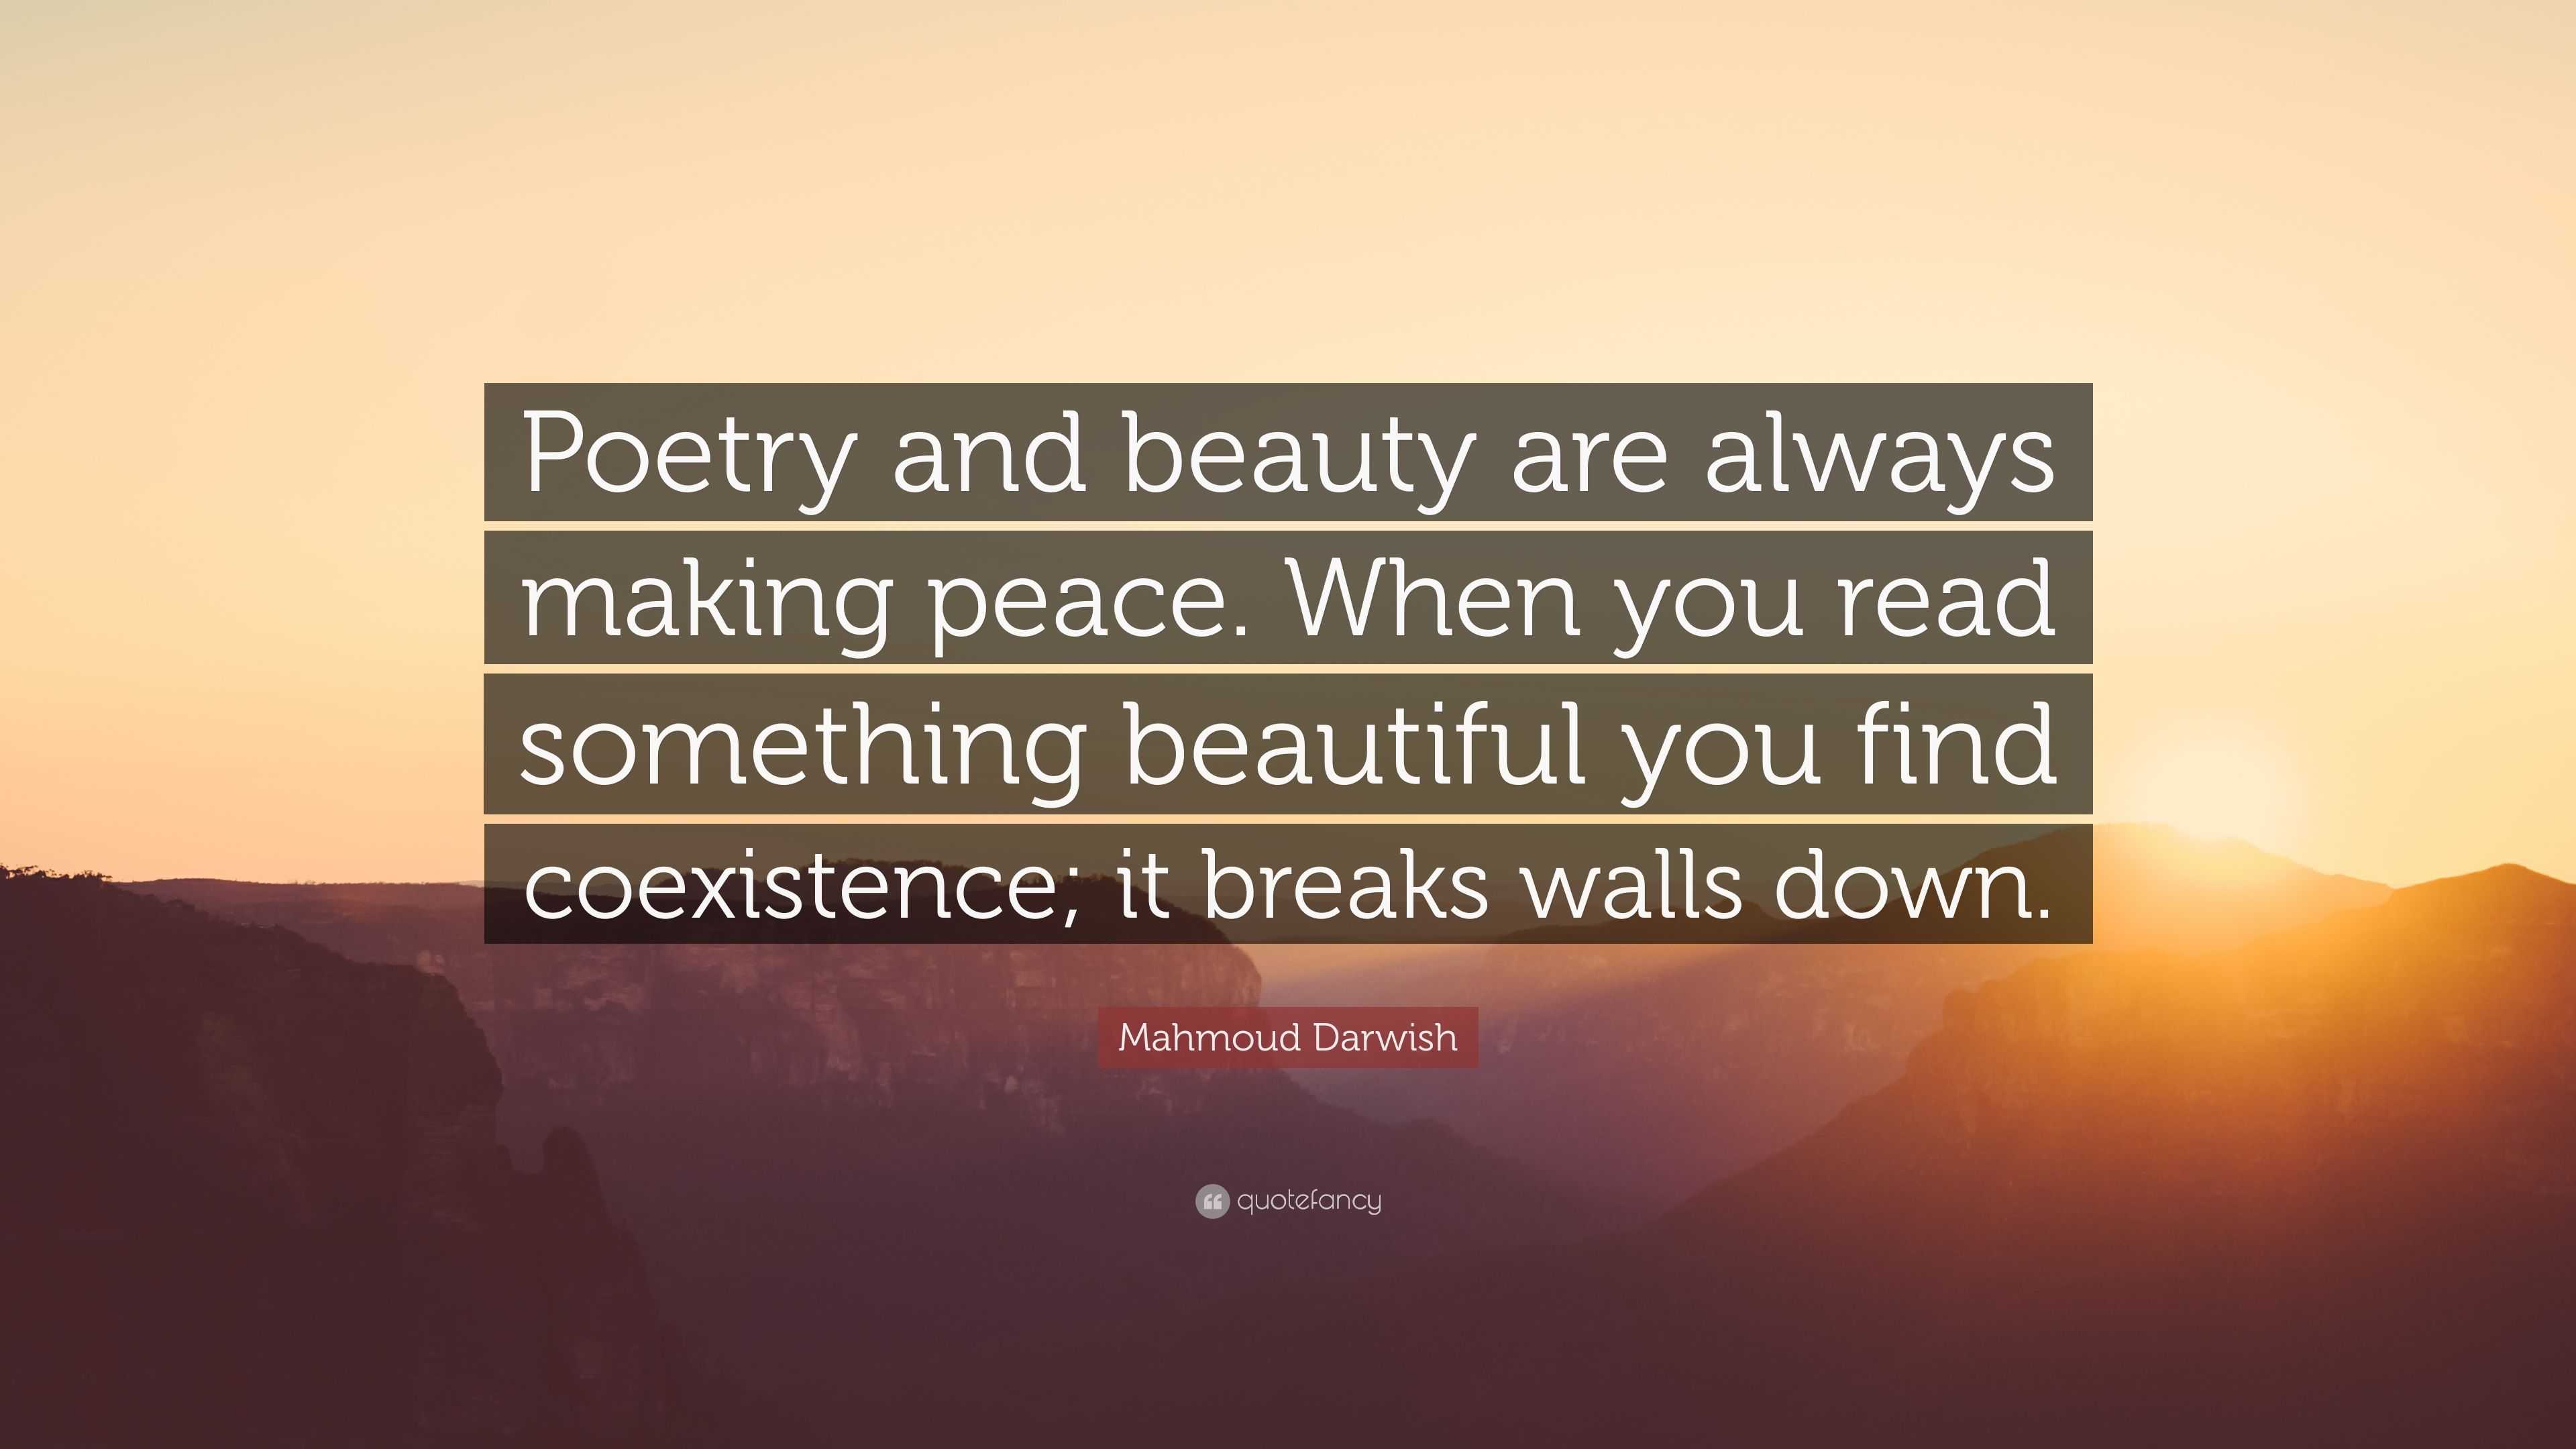 Mahmoud Darwish Quote: “Poetry and beauty are always making peace. When ...